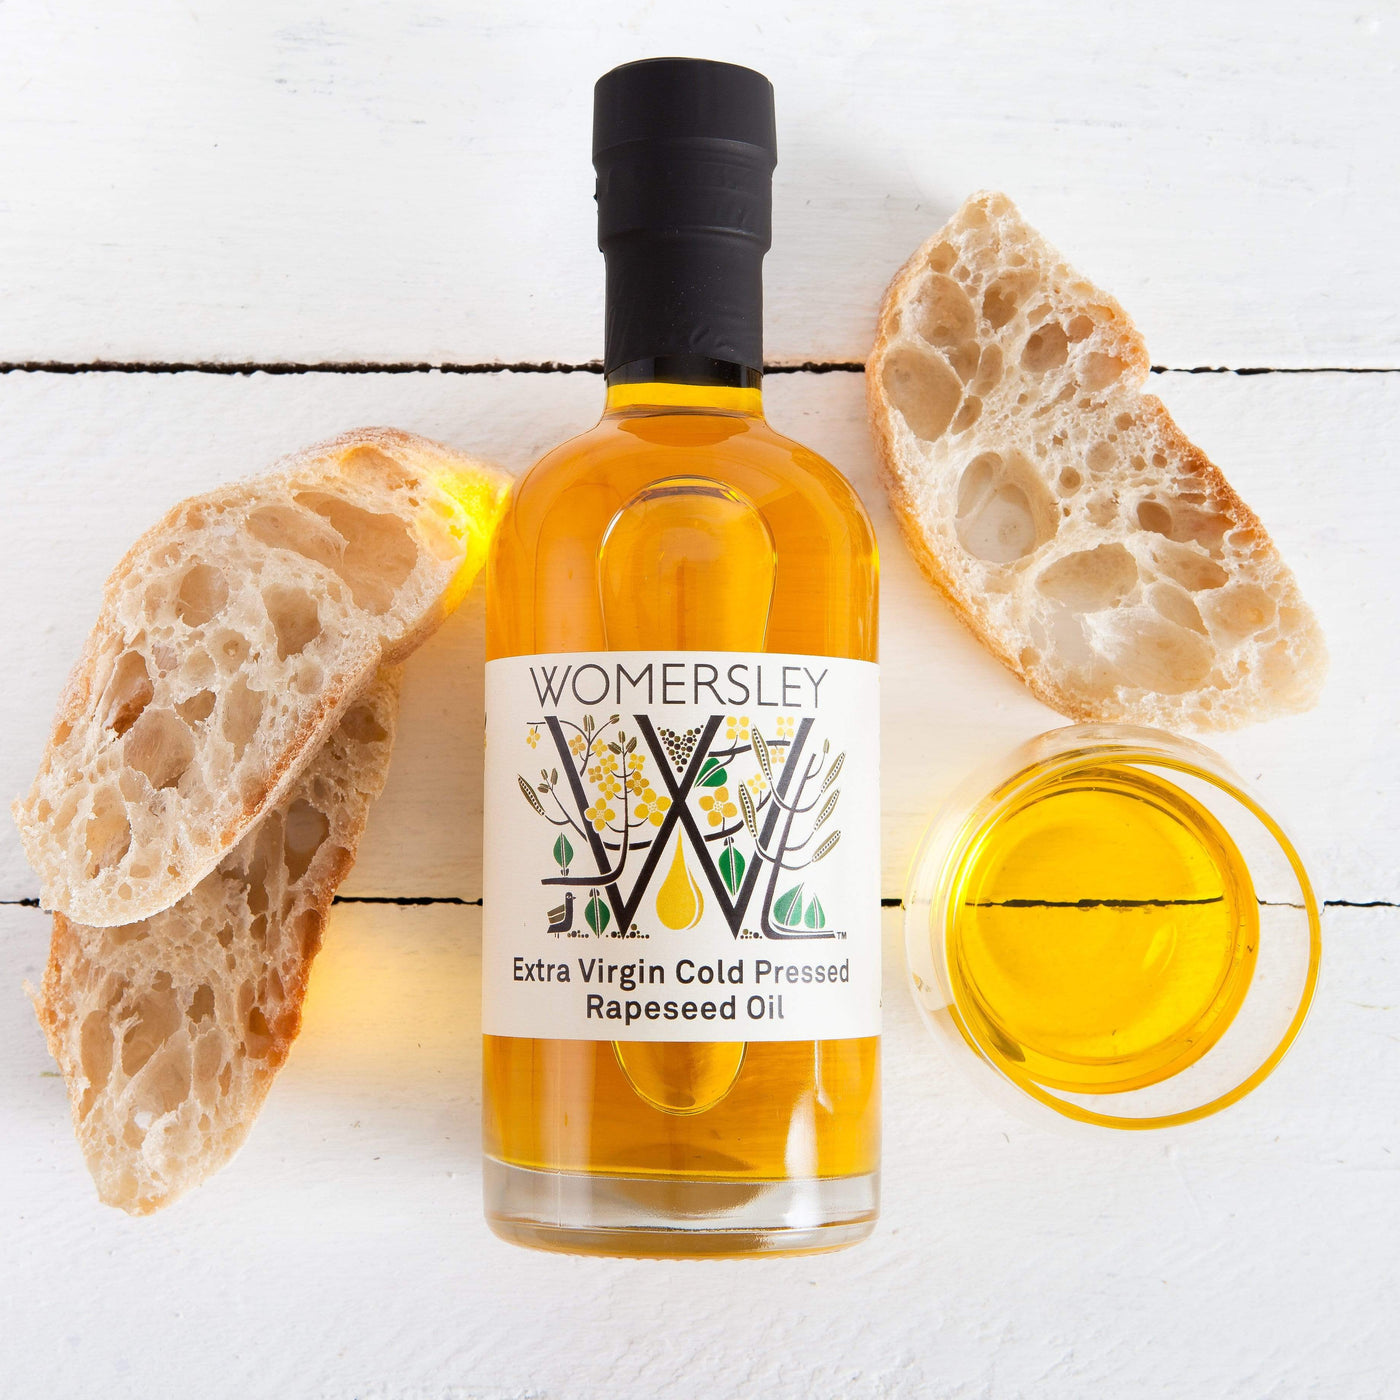 Gourmet Rapeseed Oil from the Cotswolds